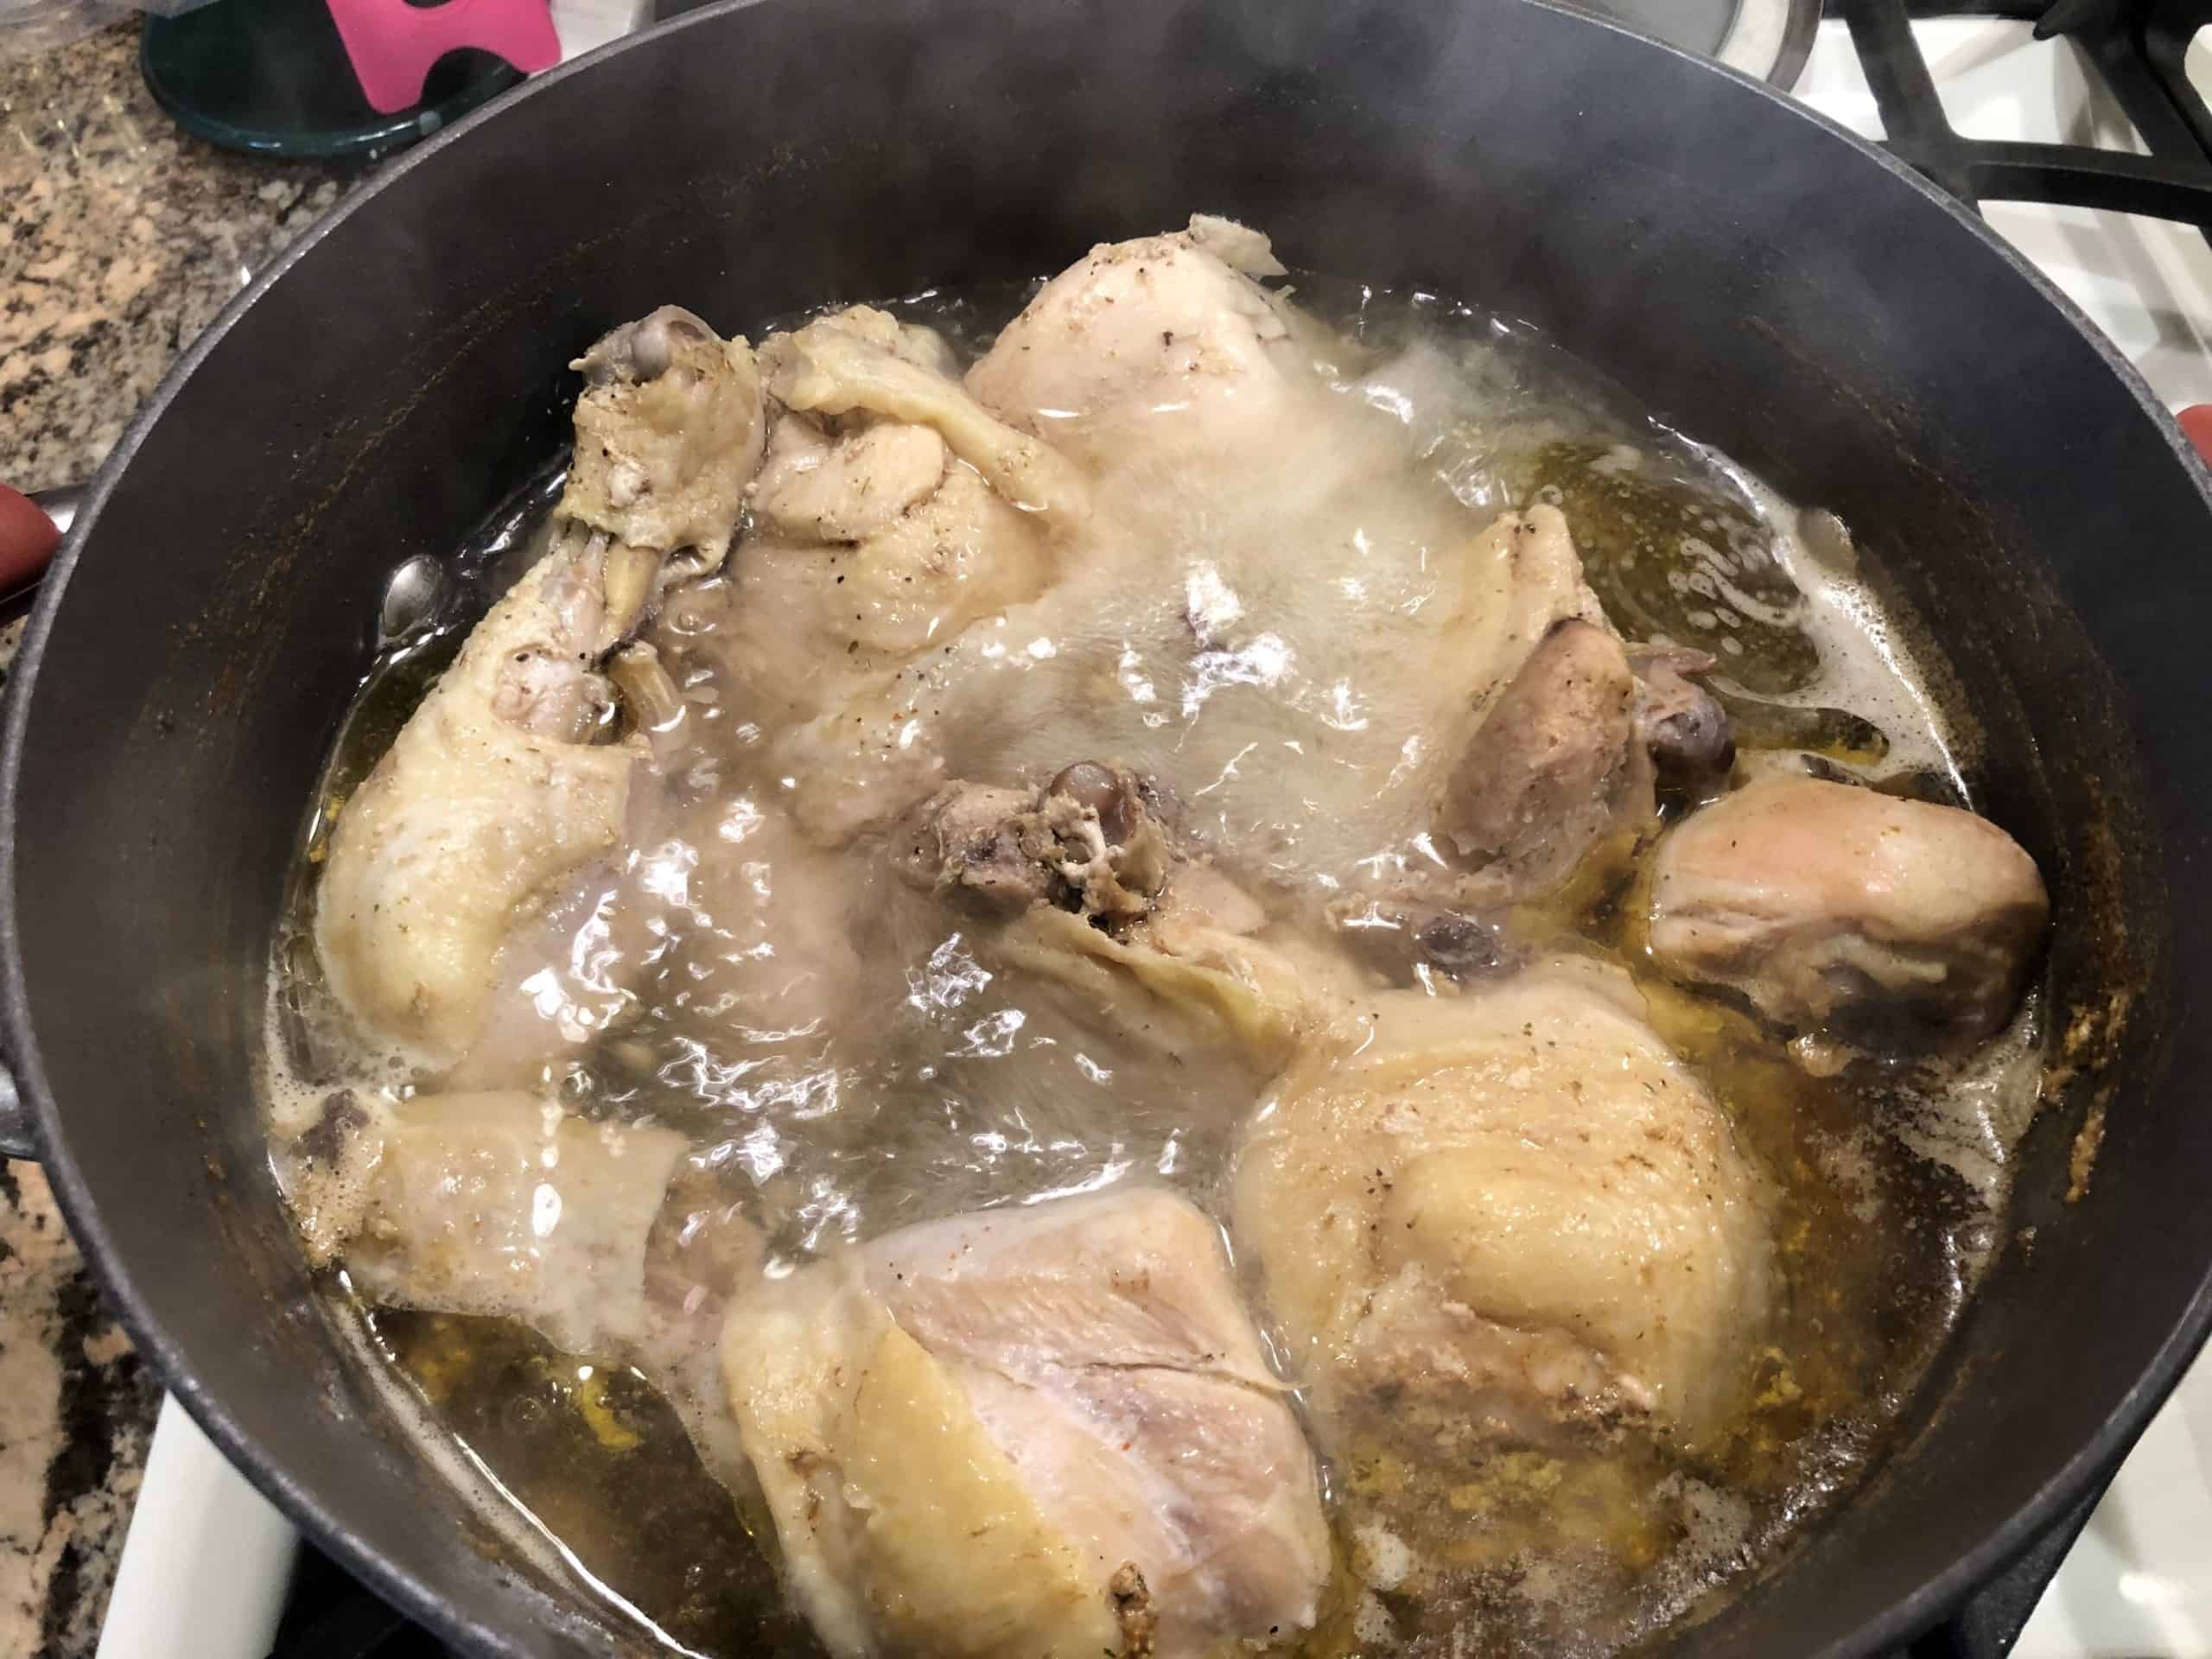 Chicken pieces boiling in seasoned water in a pot on the stove.